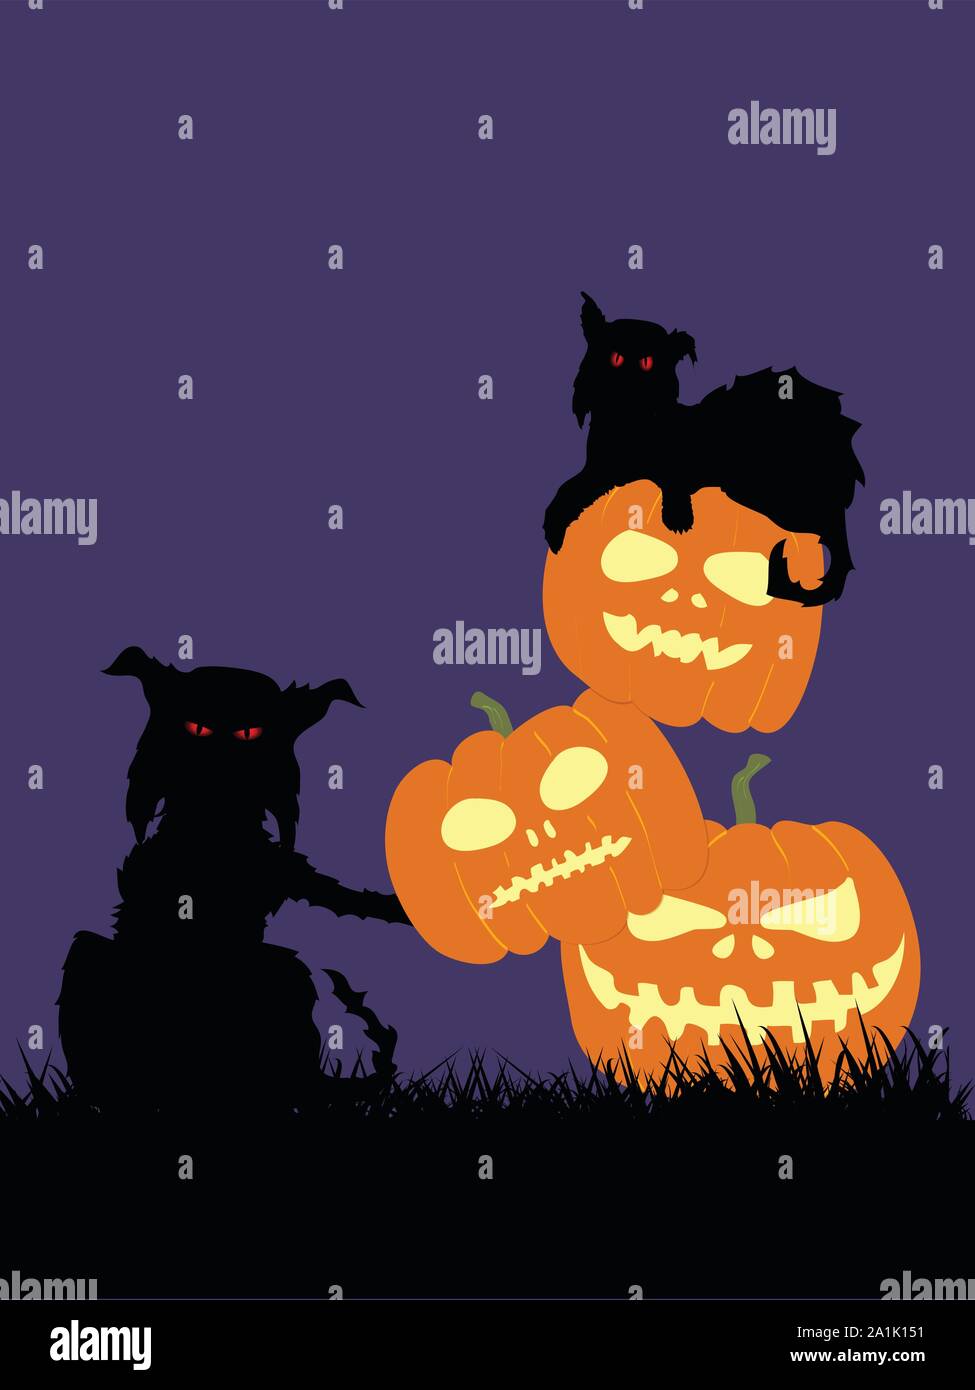 Hand Drawn Halloween Illustration Of Two Spooky Feral Cats Silhouette And Pile Of Pumpkins On Grass Over Purple Background Stock Vector